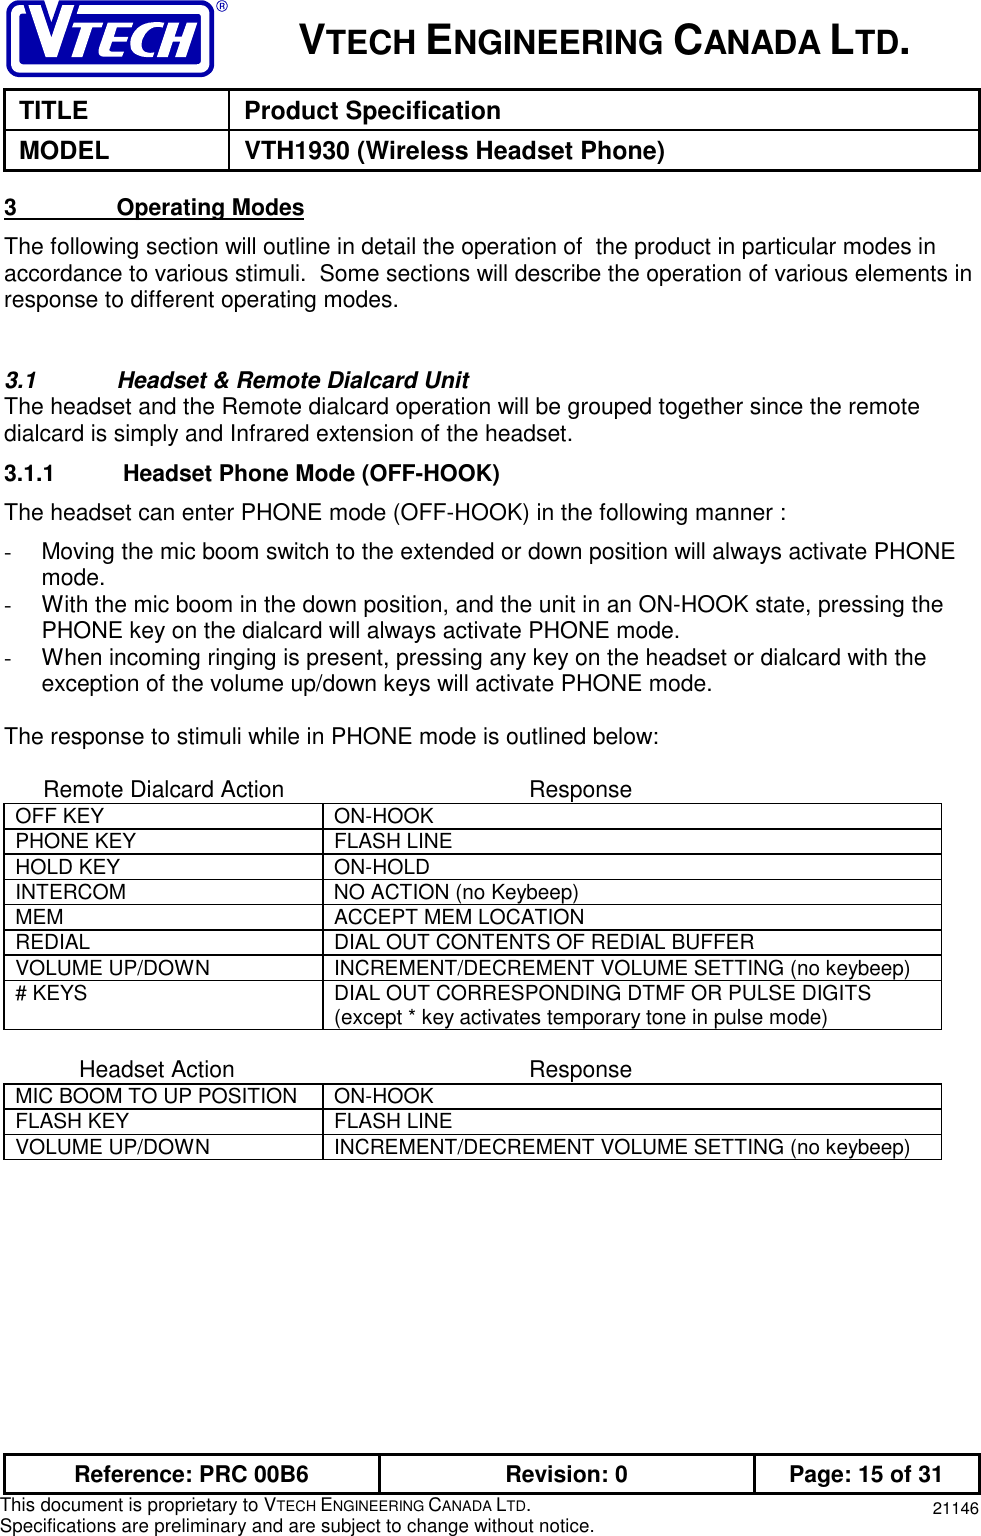 VTECH ENGINEERING CANADA LTD.TITLE Product SpecificationMODEL VTH1930 (Wireless Headset Phone)Reference: PRC 00B6 Revision: 0 Page: 15 of 31This document is proprietary to VTECH ENGINEERING CANADA LTD.Specifications are preliminary and are subject to change without notice. 211463                Operating ModesThe following section will outline in detail the operation of  the product in particular modes inaccordance to various stimuli.  Some sections will describe the operation of various elements inresponse to different operating modes.3.1  Headset &amp; Remote Dialcard UnitThe headset and the Remote dialcard operation will be grouped together since the remotedialcard is simply and Infrared extension of the headset.3.1.1   Headset Phone Mode (OFF-HOOK)The headset can enter PHONE mode (OFF-HOOK) in the following manner :-  Moving the mic boom switch to the extended or down position will always activate PHONEmode.-  With the mic boom in the down position, and the unit in an ON-HOOK state, pressing thePHONE key on the dialcard will always activate PHONE mode.-  When incoming ringing is present, pressing any key on the headset or dialcard with theexception of the volume up/down keys will activate PHONE mode.The response to stimuli while in PHONE mode is outlined below:      Remote Dialcard Action ResponseOFF KEY ON-HOOKPHONE KEY FLASH LINEHOLD KEY ON-HOLDINTERCOM NO ACTION (no Keybeep)MEM ACCEPT MEM LOCATIONREDIAL DIAL OUT CONTENTS OF REDIAL BUFFERVOLUME UP/DOWN INCREMENT/DECREMENT VOLUME SETTING (no keybeep)# KEYS DIAL OUT CORRESPONDING DTMF OR PULSE DIGITS(except * key activates temporary tone in pulse mode)Headset Action ResponseMIC BOOM TO UP POSITION ON-HOOKFLASH KEY FLASH LINEVOLUME UP/DOWN INCREMENT/DECREMENT VOLUME SETTING (no keybeep)